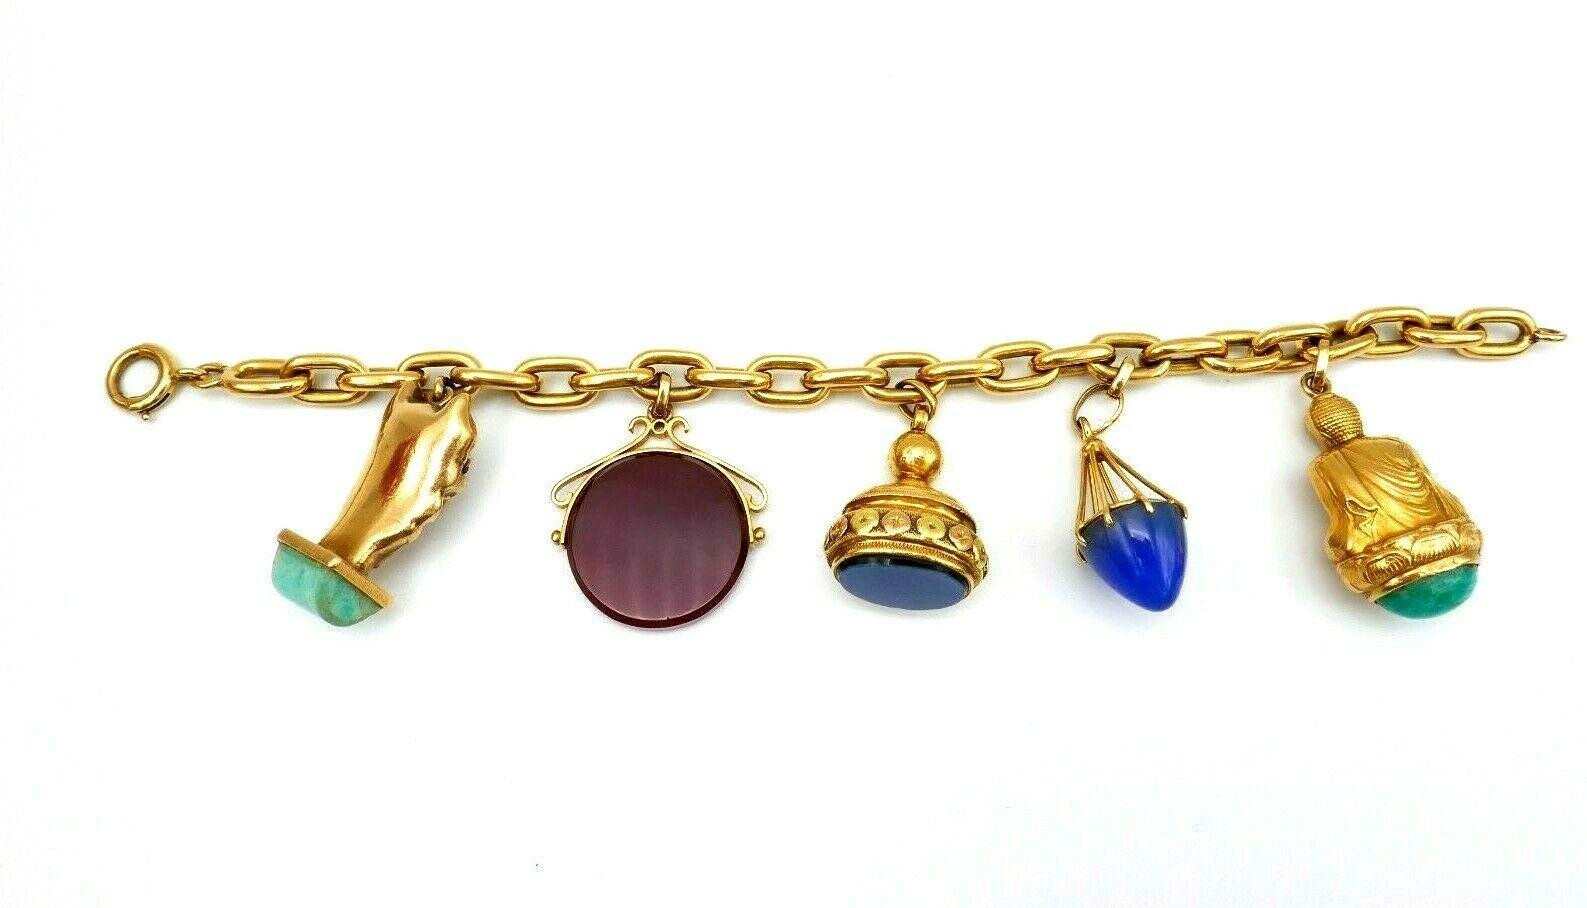 Antique French 18k yellow gold charm bracelet featuring five gemstone charms. 
Carved carnelian spinning charm; two-tone gold agate signet charm; cone chalcedony charm; Buddha with amazonite; Dragon Head with jade. Stamped with French